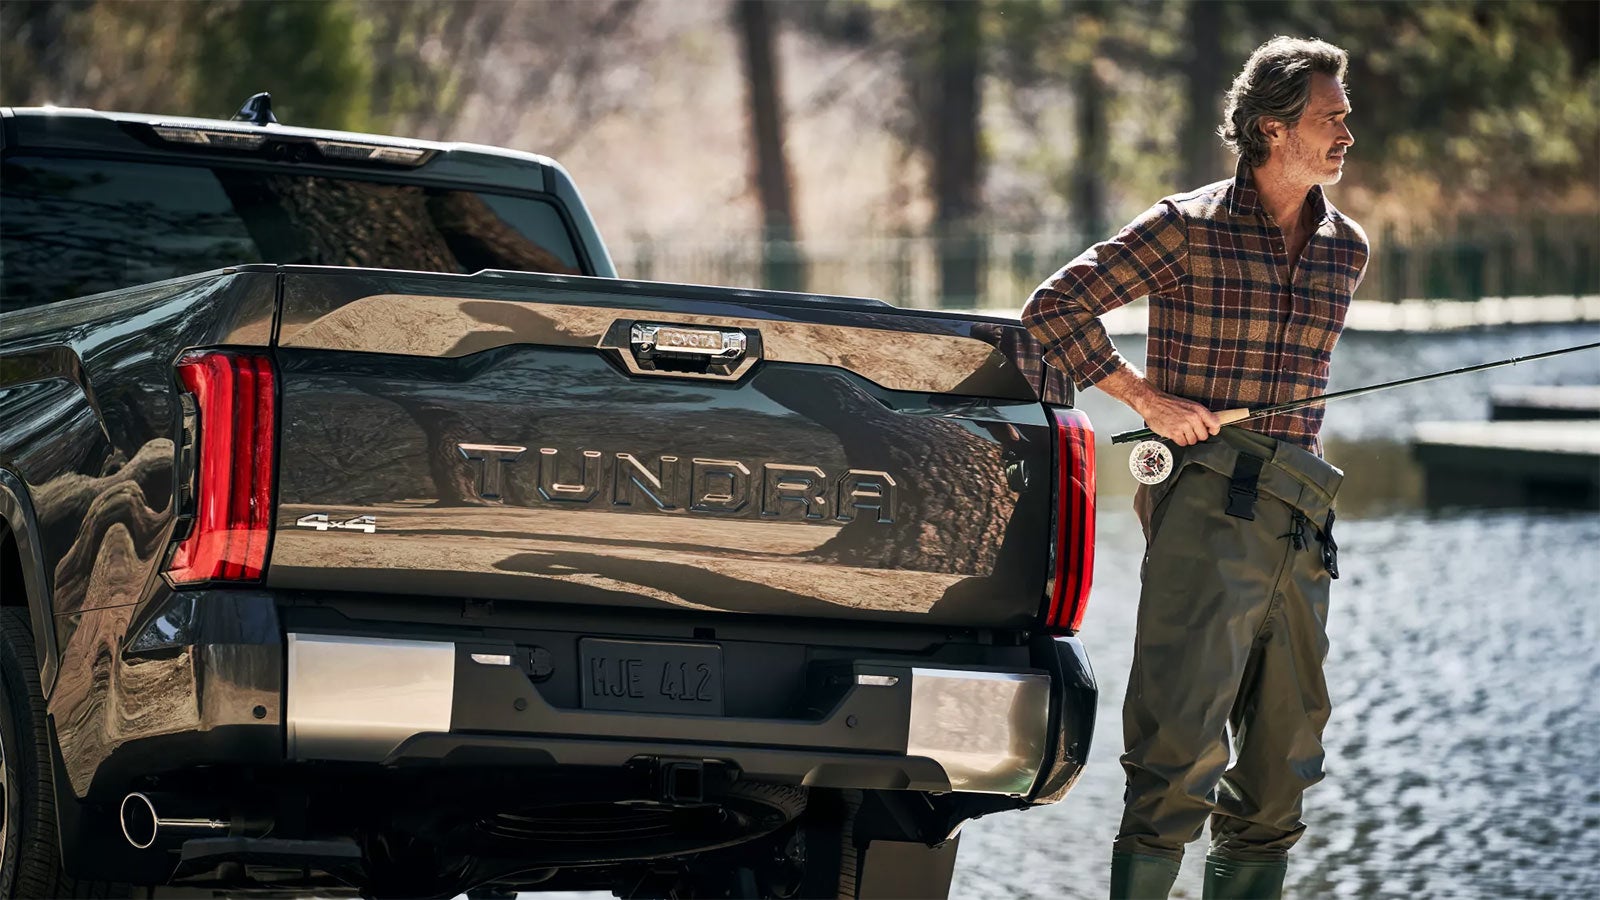 2022 Toyota Tundra Gallery | Middletown Toyota in Middletown CT